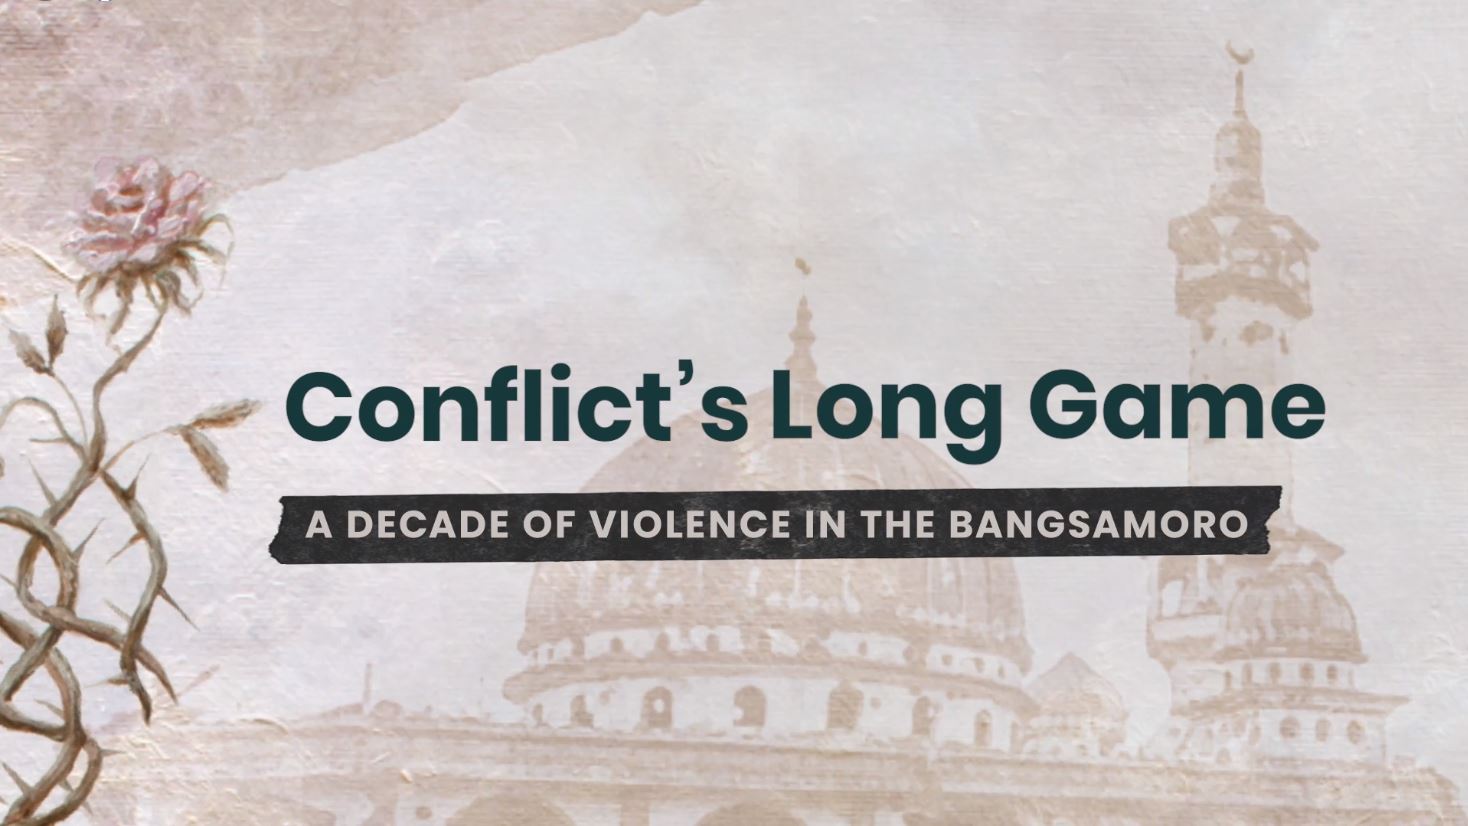 Conflict’s Long Game: A Decade of Violence in the Bangsamoro